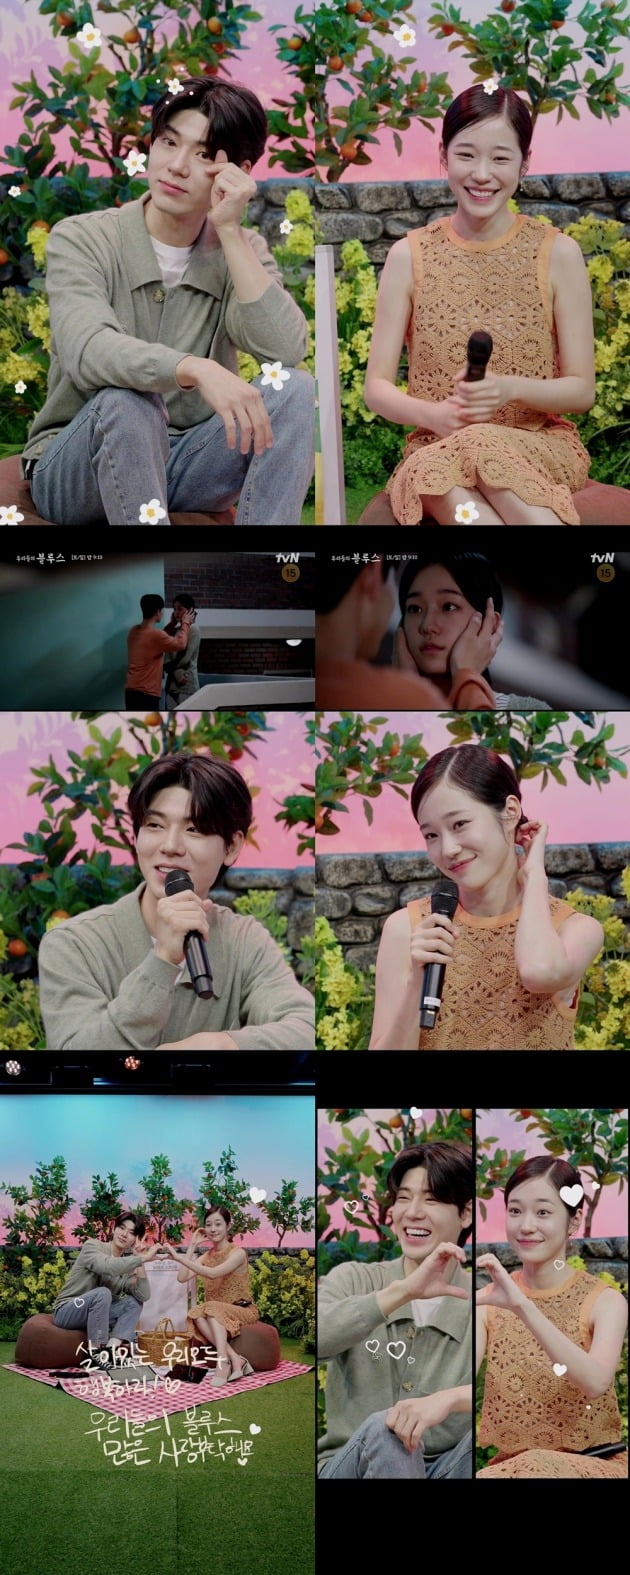 Our Blues youngest Bae Hyun Sung and Noh Yoon Seo delivered a testimony on the shooting of Drama and a surprise spoiler and acted as a public relations fairy.TVN Saturday Drama Our Blues in Jeju Pan Romeo and Juliet Bae Hyun-sung (Jung Hyun Station) and Noh Yoon-seo (Bang Yeong-ju Station) on April 30 Naver Now (NOW.)We went to Our Blues Special Show and talked about Drama.The new actors Bae Hyun-sung and Noh Yoon-seo appeared as the main characters of the episode Our Blues episode Prince and the Prefect. Bae Hyun-sung said in the casting news, I didnt believe it at first.I was happy and happy, and Our Blues dreamed that I still do not feel it .In Our Chart Show, the two cited roles they would like to play if they played another character: Kim Woo-bin Sunbather, youre so cool, Bae said.Noh Yun-seo said, I am Han Ji-min Sunbather. She is so beautiful.Han Ji-min and Kim Woo-bin are in the romance of the sea girl and the captain. The two of them boasted of Kimi, saying, Are you breathing together again?Bae Hyun-sung also raised Kim Woo-bin in the rankings and showed a shy fanship and caused a laugh.I also talked about the behind-the-scenes scenes of emotional upheaval with my fathers.When I was shooting a scene where my father, Park Ji-hwan, smashed things, I was watching a monitor next to him, and my feelings were conveyed and my heart was hurt, Bae said.Noh Yoon-seo said,  (Father Choi Young-joon) Sunbather hit his cheek, and my hand automatically went out because I was sick.The two said, My fathers were so good at acting, we just followed, and just seeing the acting became a momentary lord and prefecture.I also had a surprise spoiler time. Noh Yoon-seo said, Can the fathers who have become angry reconcile?I could do it among my friends, I might want to do it too much, and I think I understand each others position. I did not tell you why I turned around.If you try to talk deeply, you will not be reconciled. The two people said, Please check with Drama. Regarding the expected episodes in the future, Noh Yoon-seo said, The story of Okdong and Dongseok (Kim Hye-ja and Lee Byung-hun) is likely to be a tear party.Regarding the episode, which is expected to be unexpected, Bae Hyun-sung said, Who would call Han Ji-min? I was completely different from the person I expected while watching the script.Many people seem to be curious, he said, adding that he talked with the audience mode and stimulated curiosity.Bae Hyun Sung and Noh Yoon Seo caught the eye with their new charm and the charm of reversal that can not be seen in Drama.The two asked for Drama, which is drama that I want to comfort and support because it is my story, I want to be sympathetic, angry and patted, about our Blues.The 8th episode of Our Blues will be broadcast at 9:10 p.m. on the 1st.